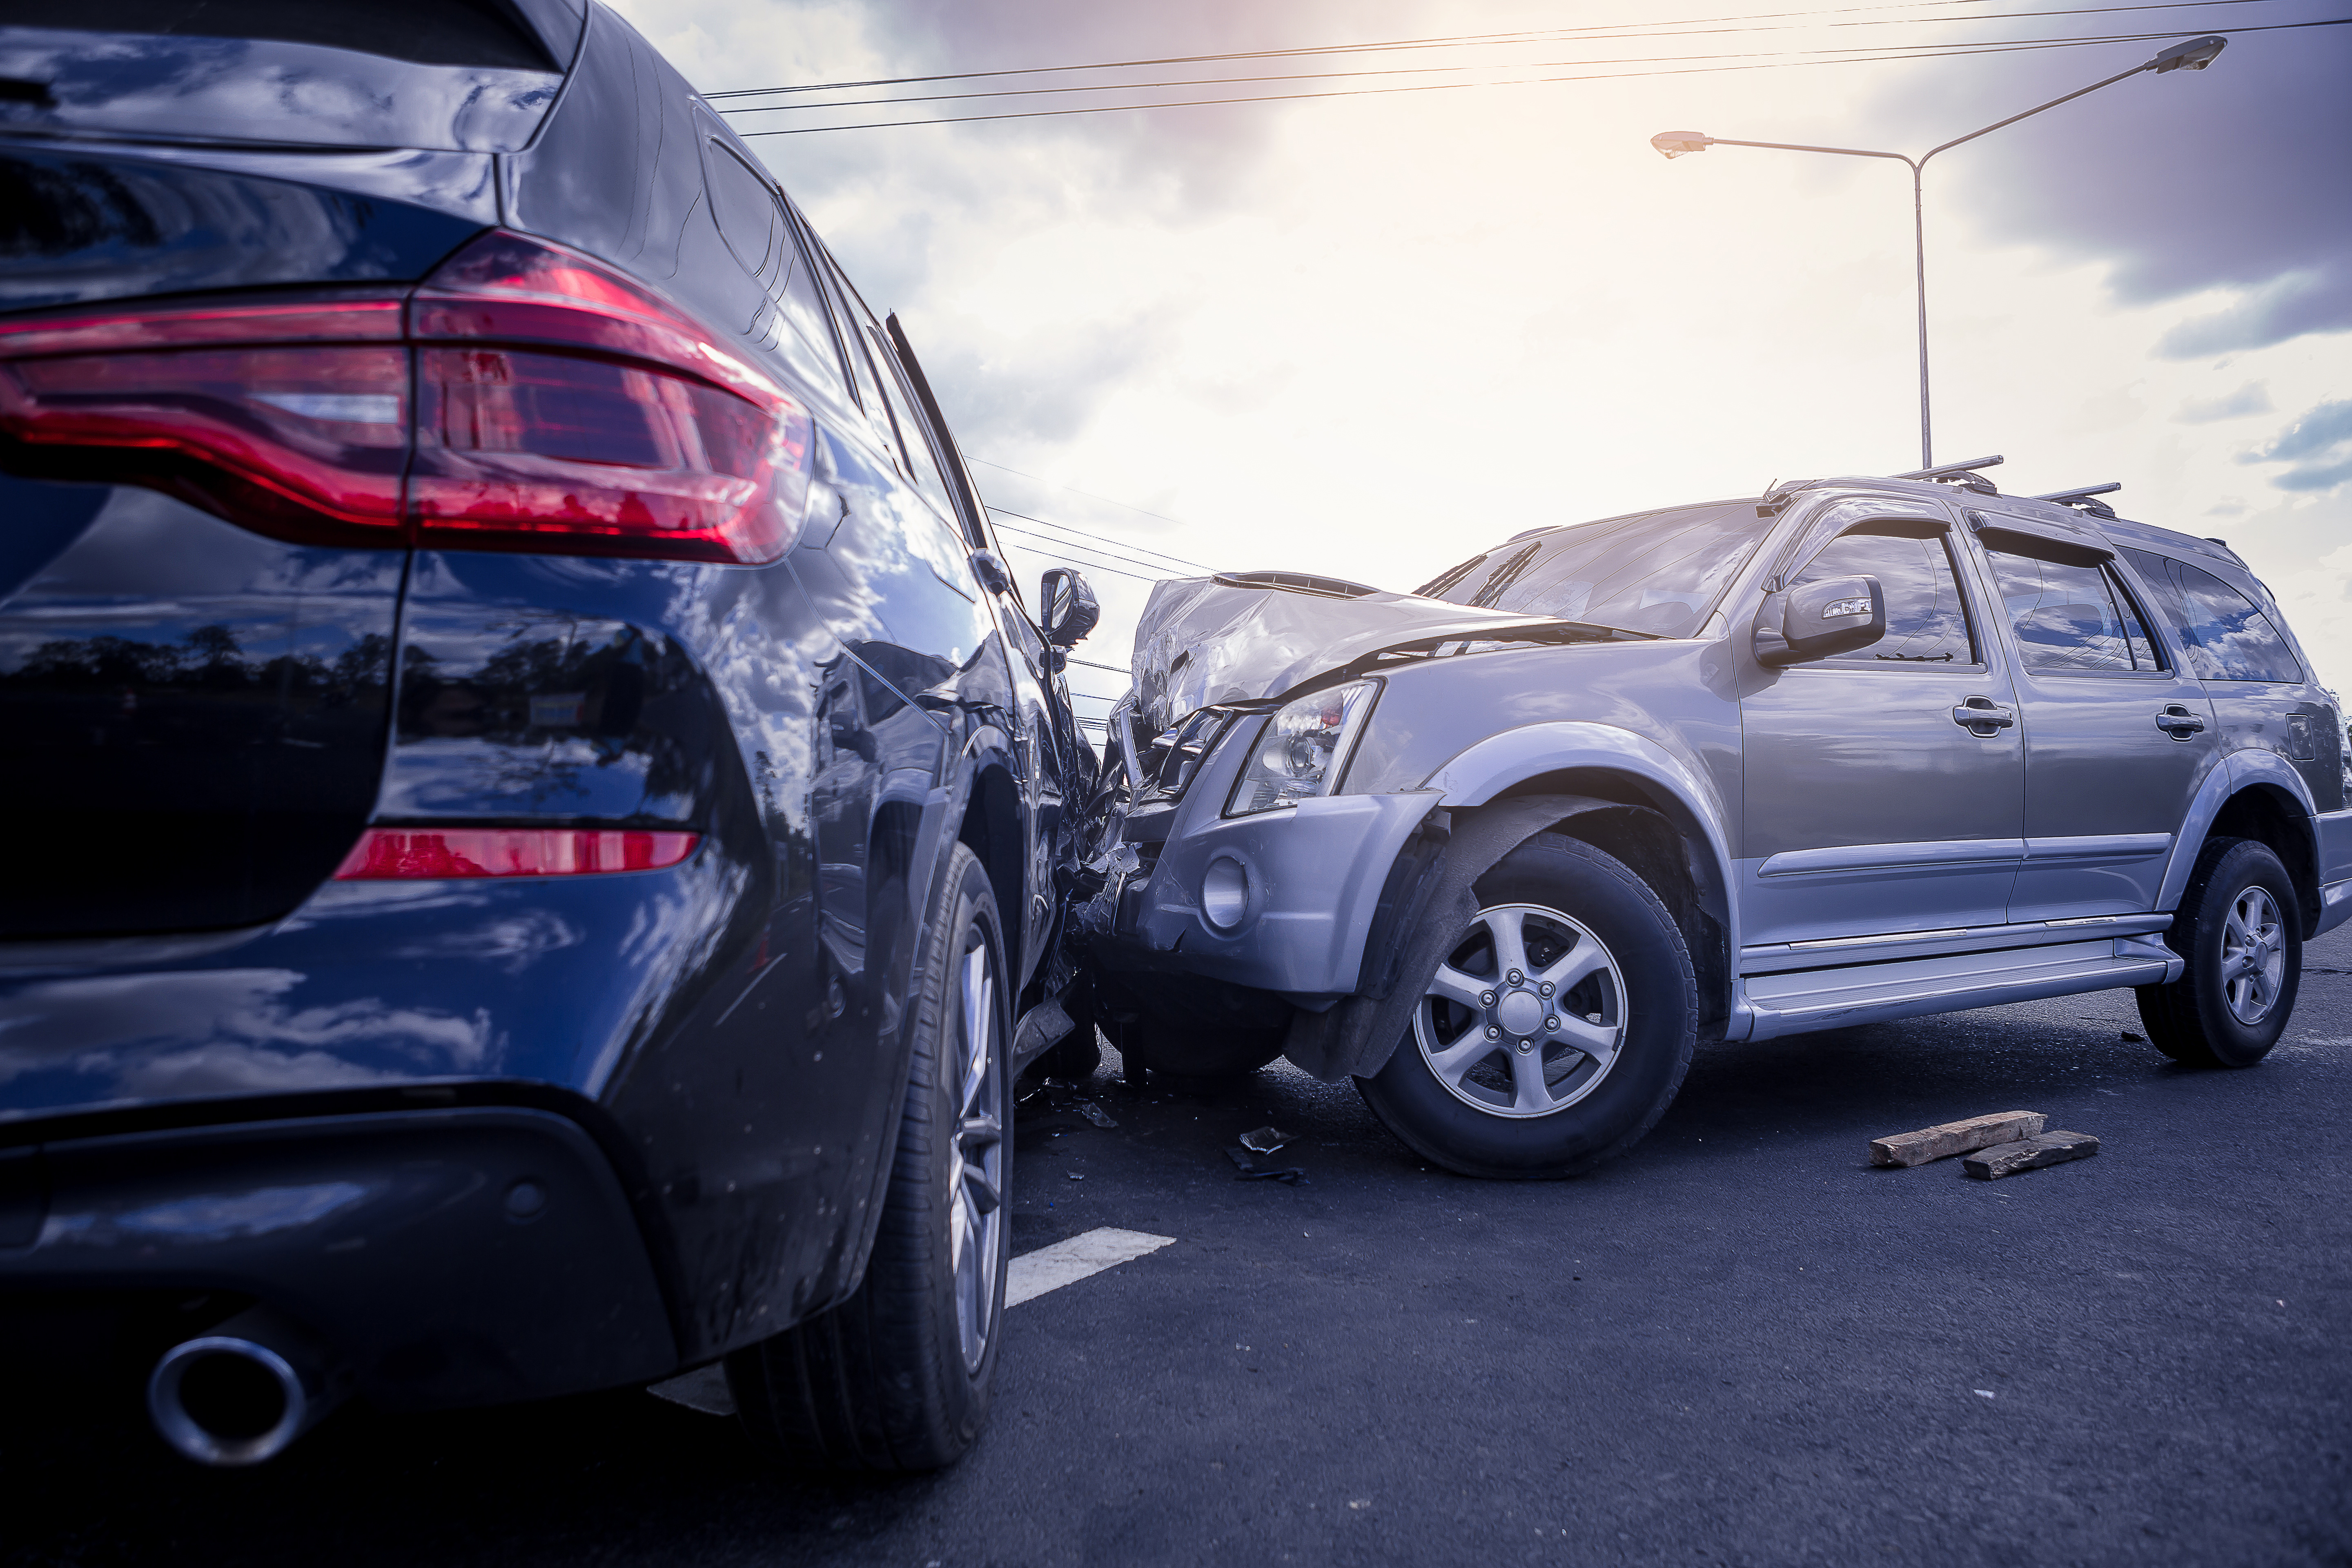 Car Accidents Can Cause Permanent Injuries